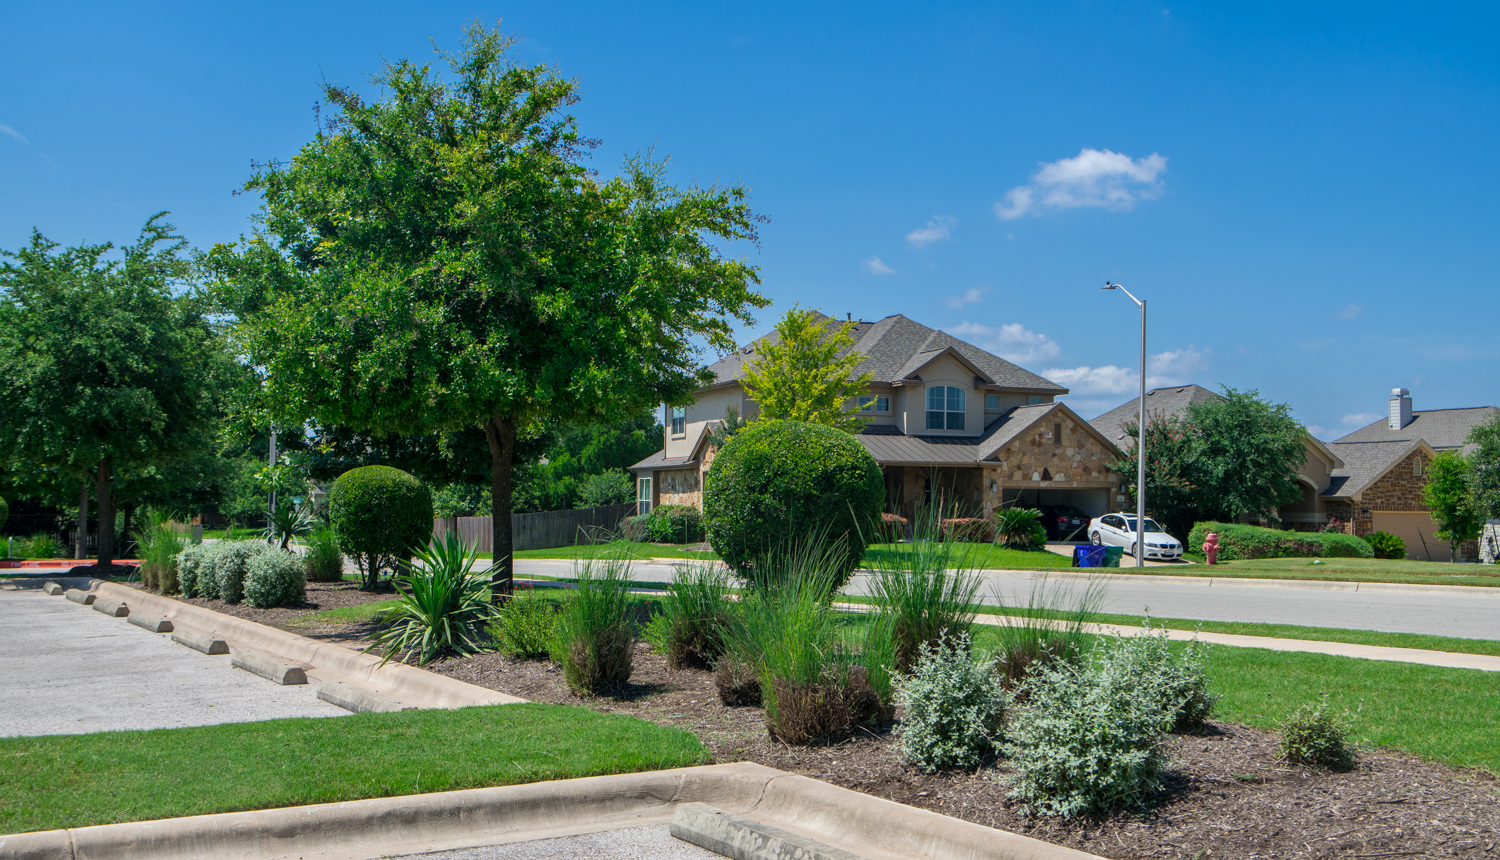 commercial-landscaping-CaballoRanch-parking-trees-shrubs-planting-2